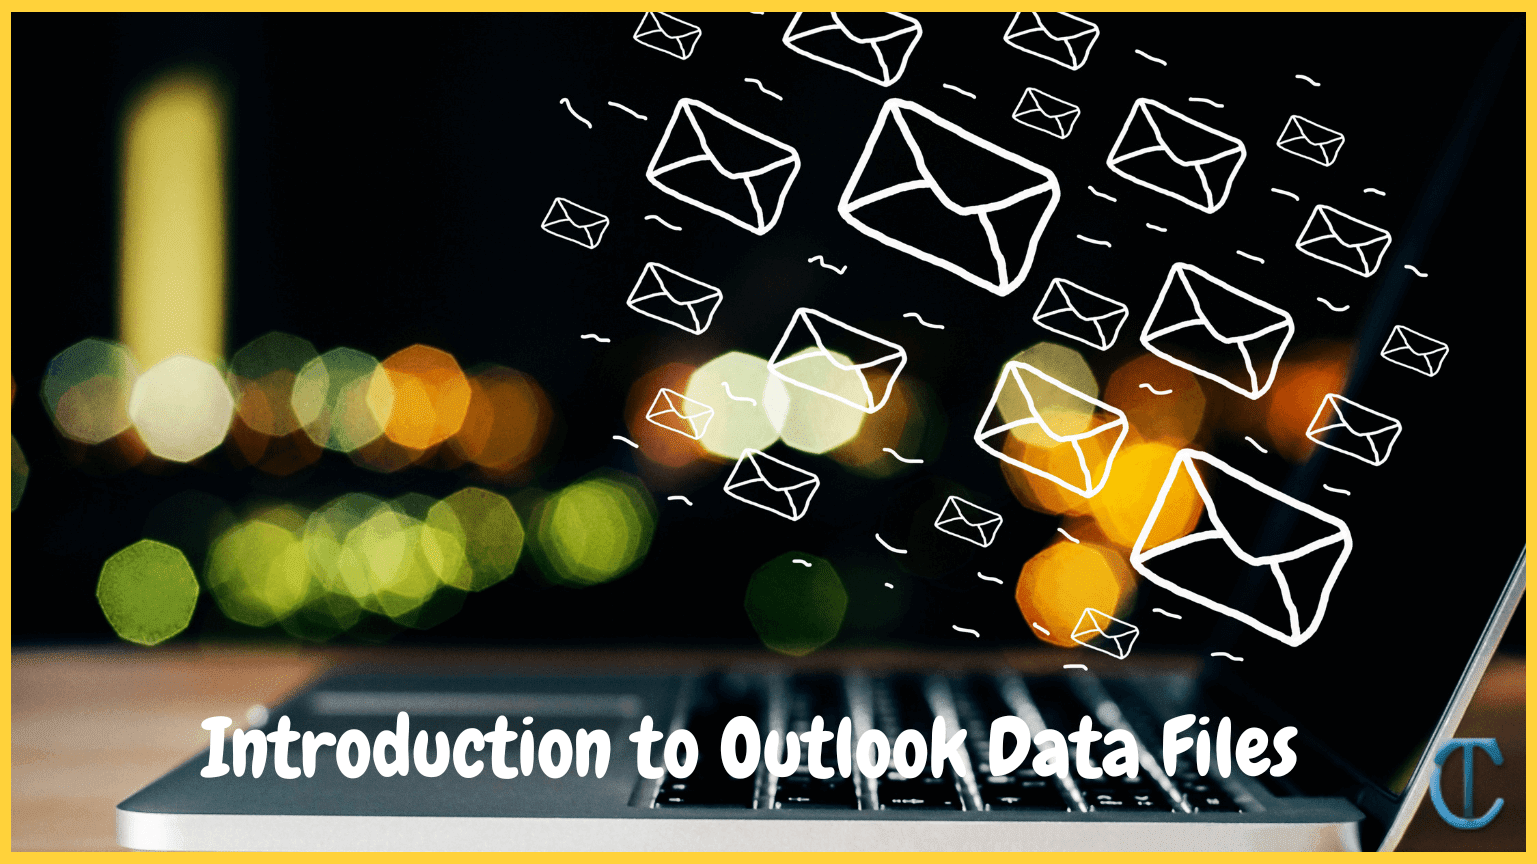 About Outlook data files